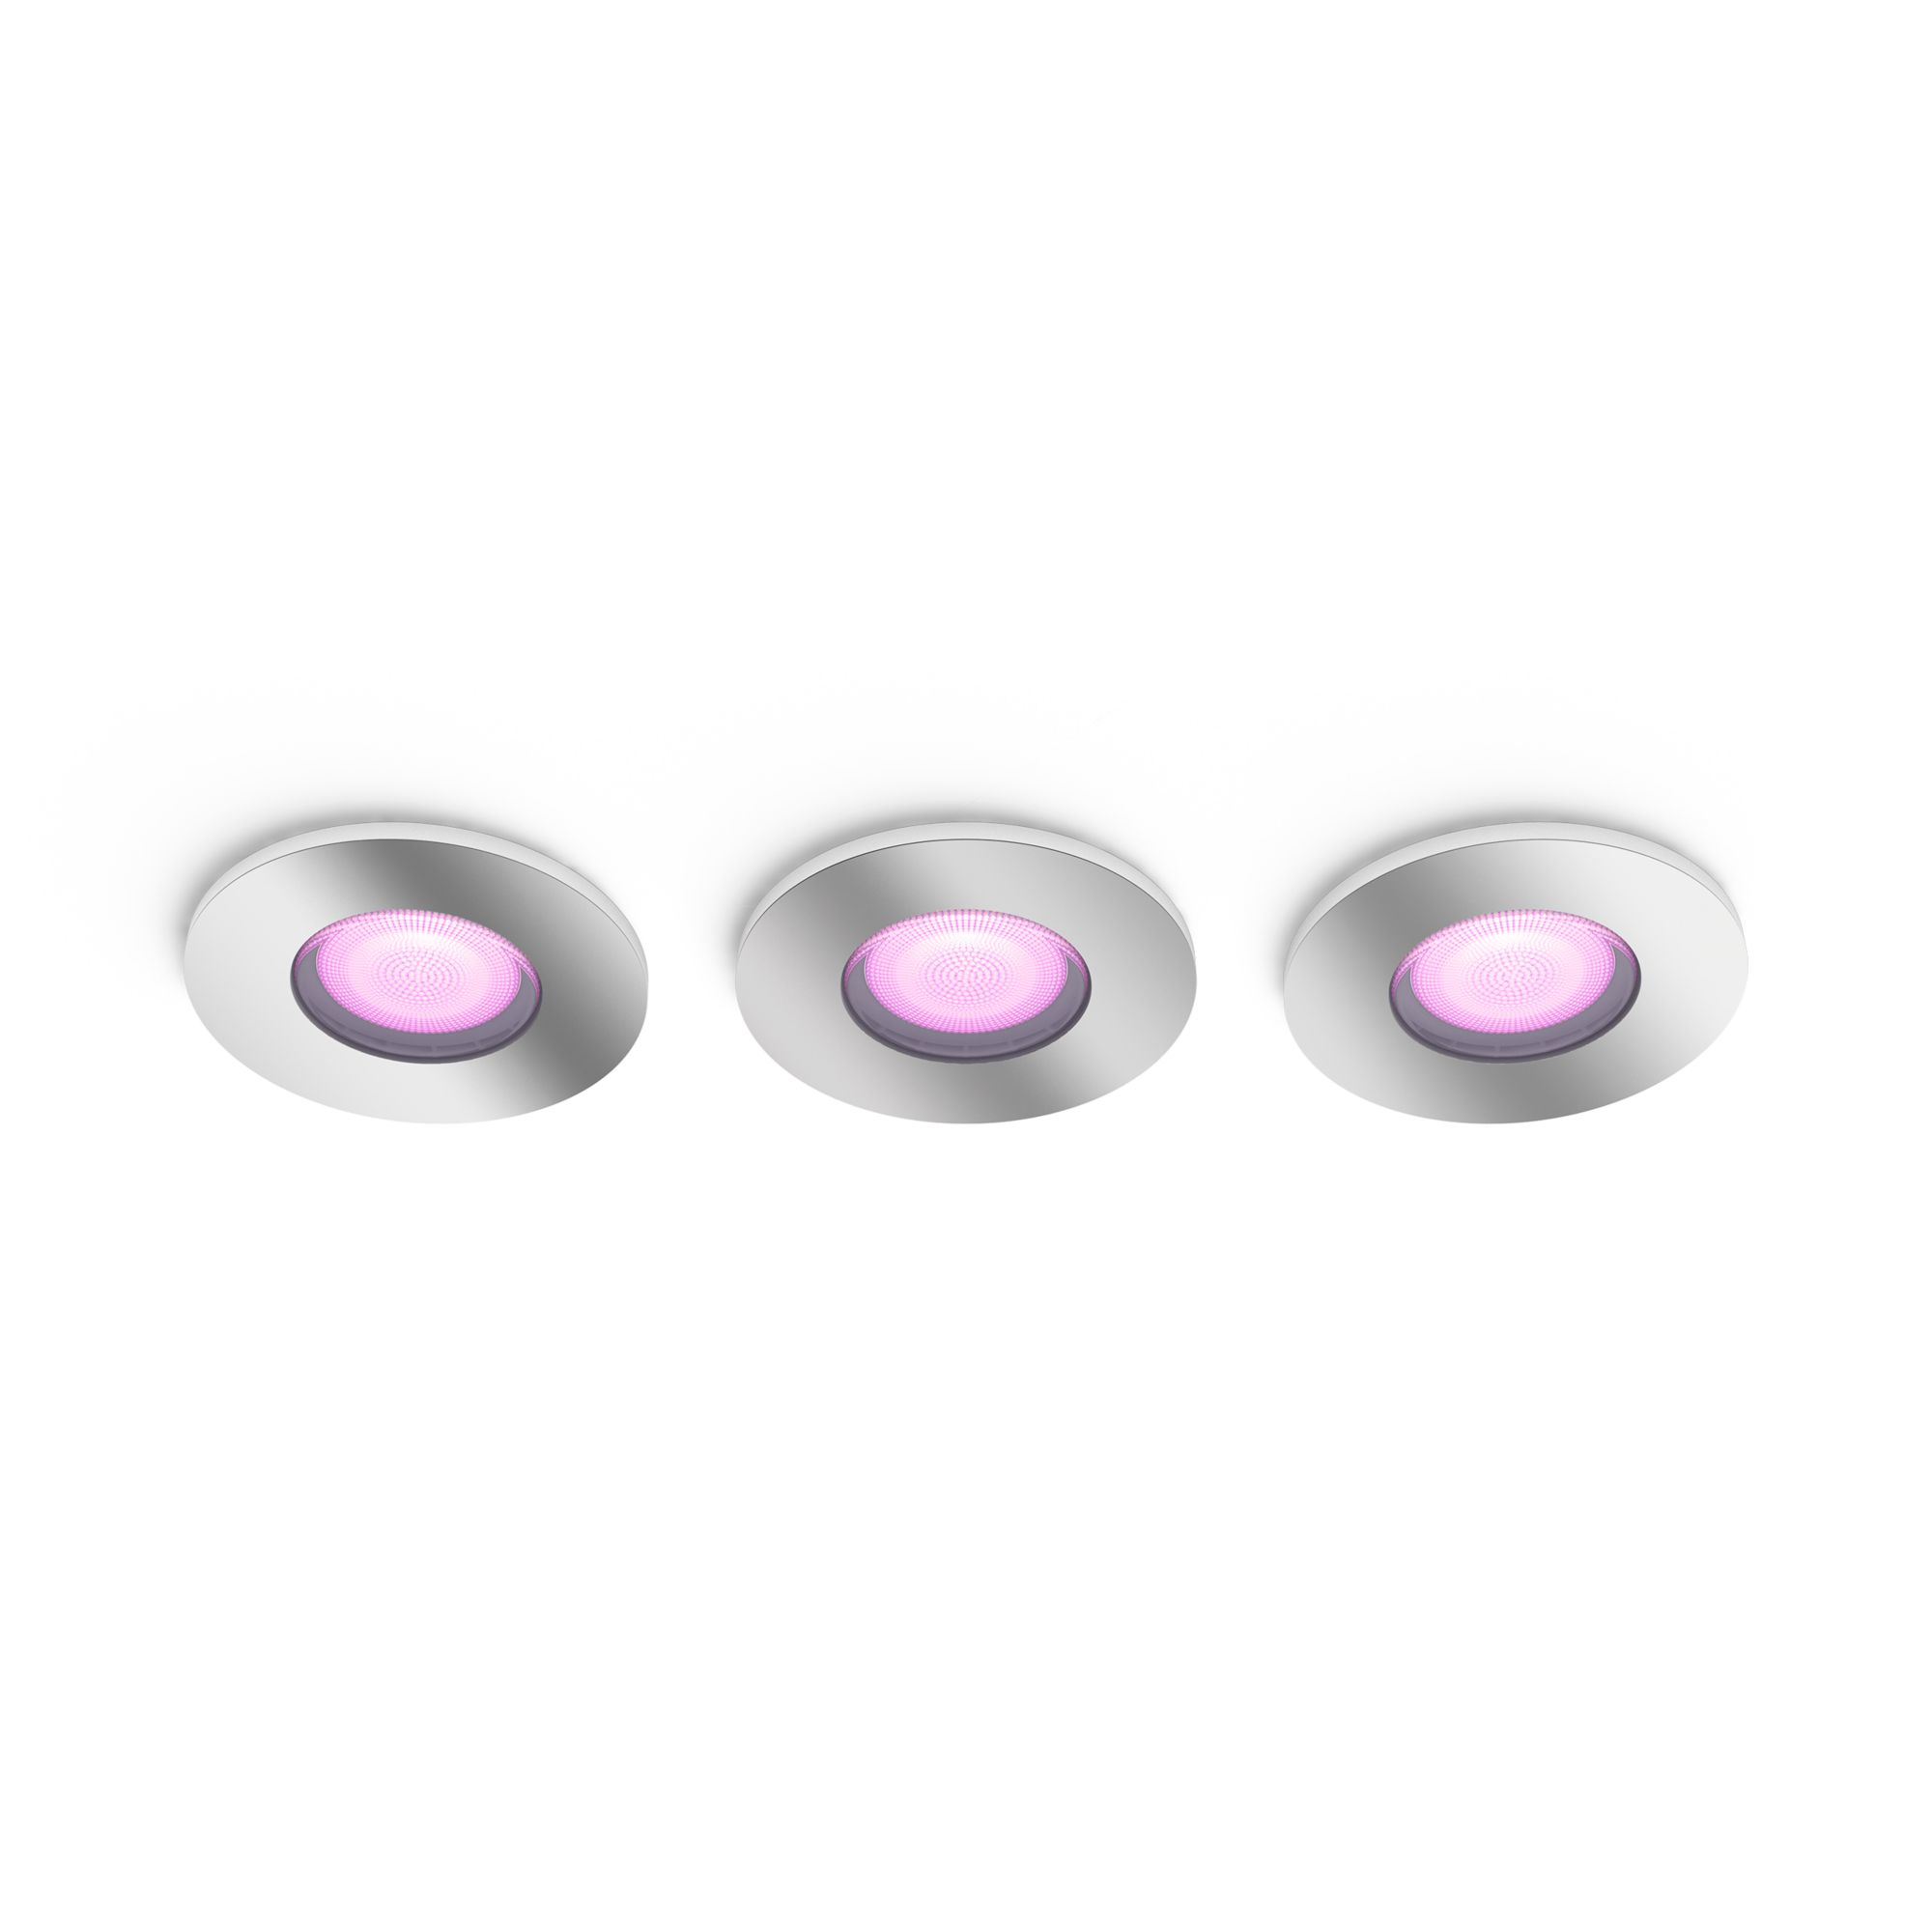 Philips by Signify 3-pack Xamento inbouwspot